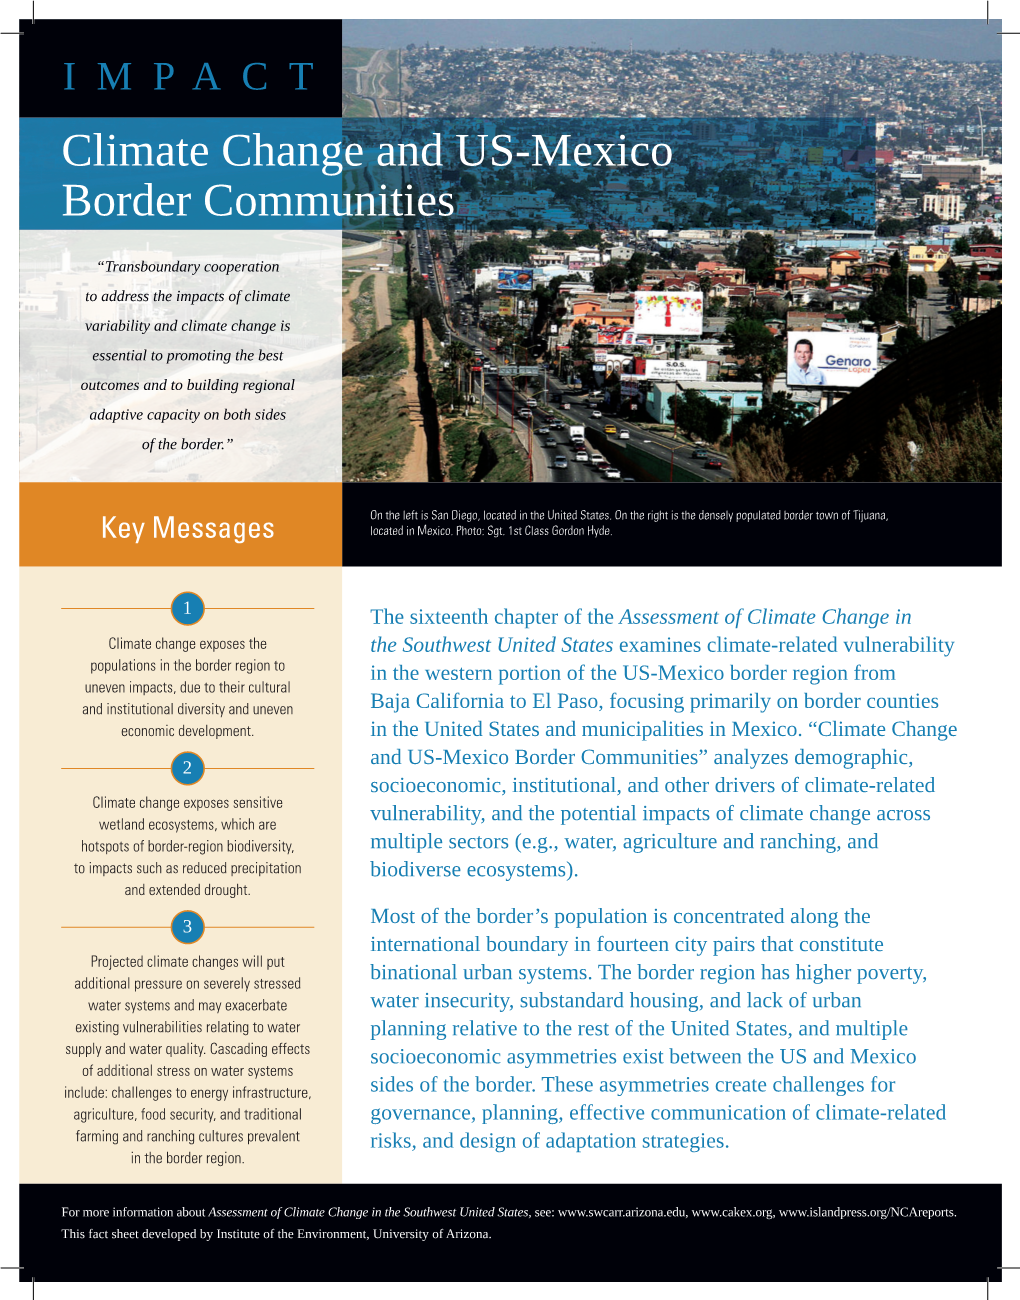 Climate Change and US-Mexico Border Communities